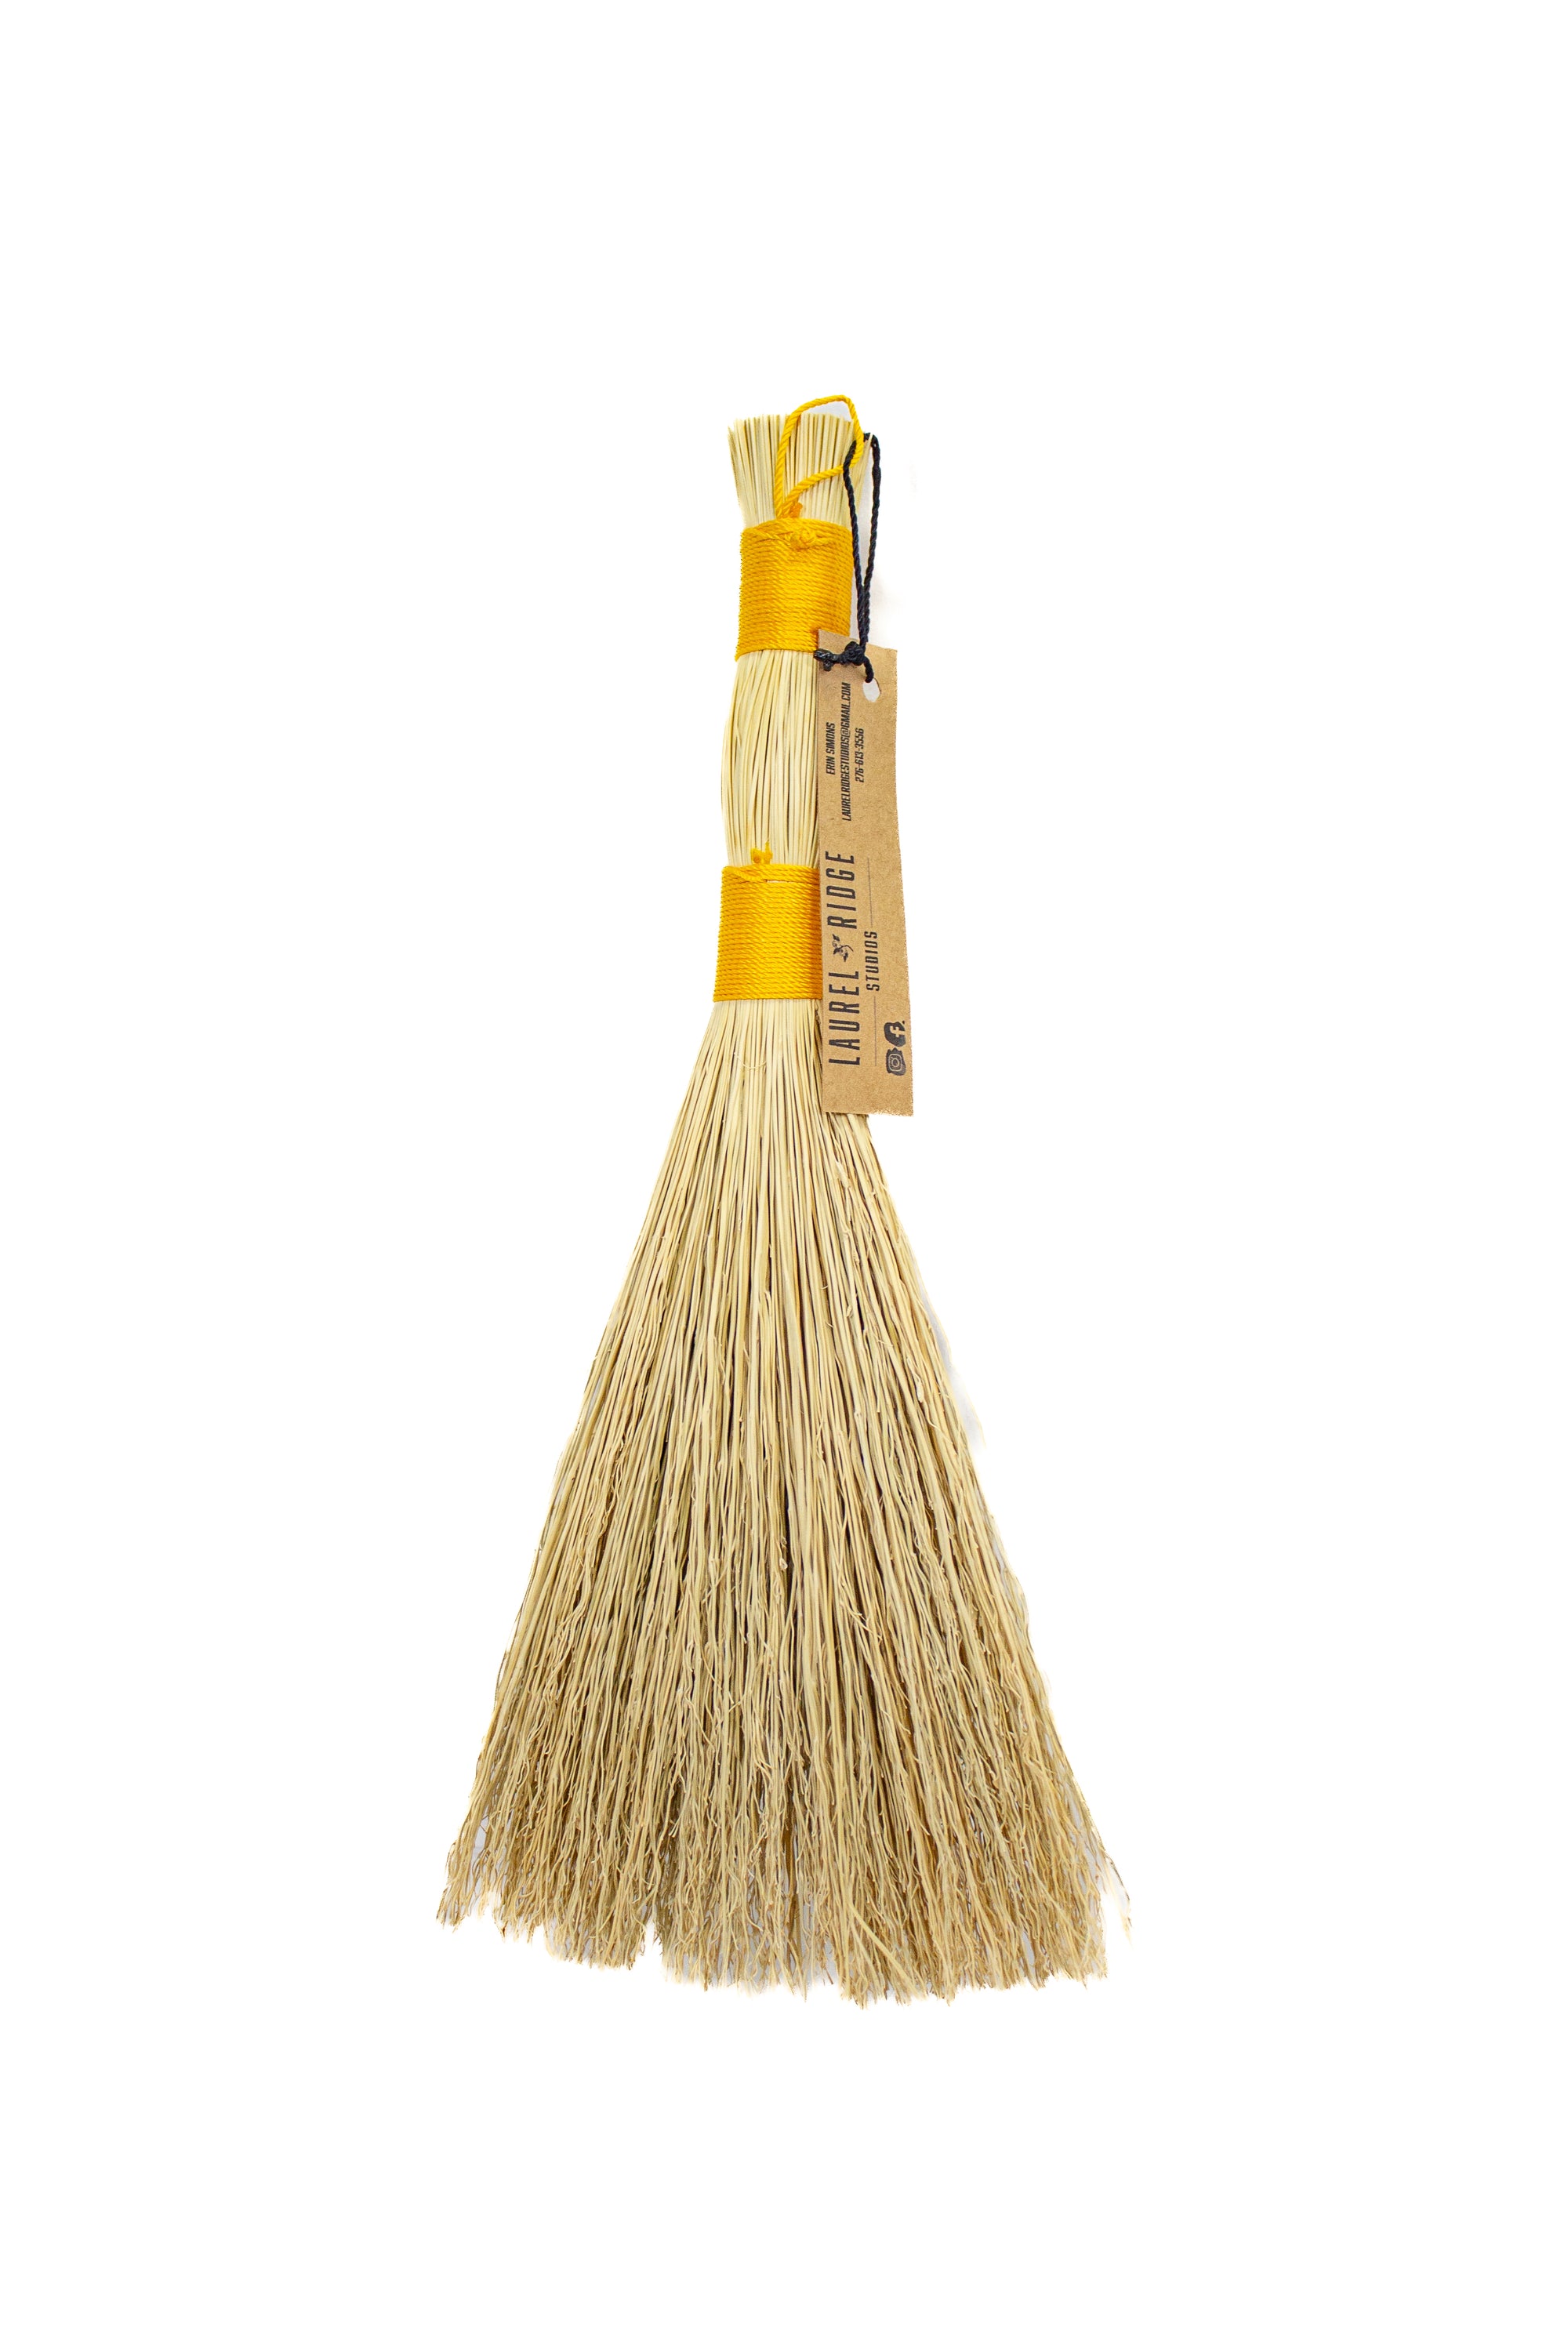 Hawk's Tail Whisk Broom